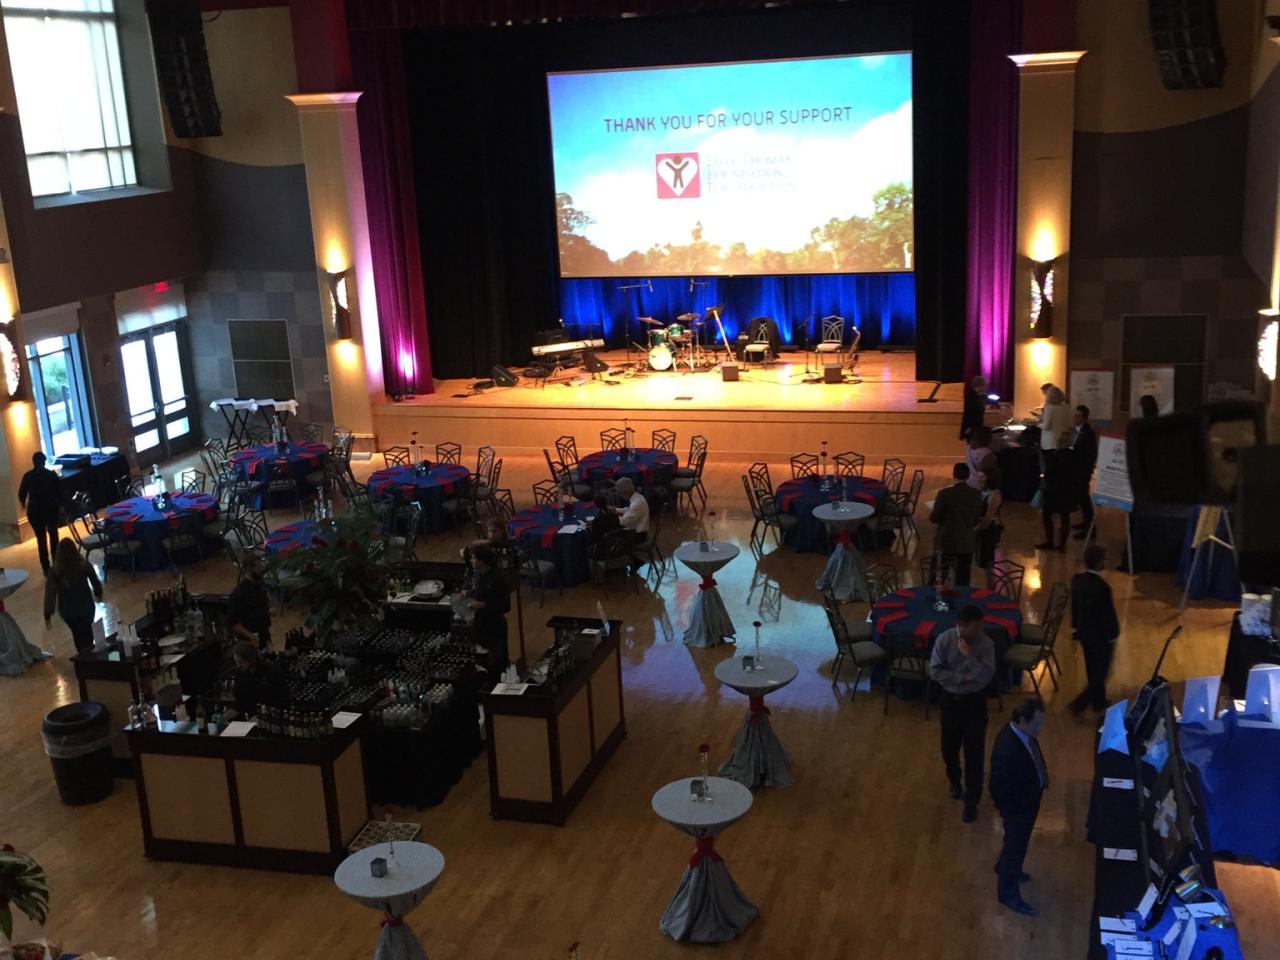 Ohio Union Performance Hall - 5, 192 square feet - Events, Conferences and Meetings